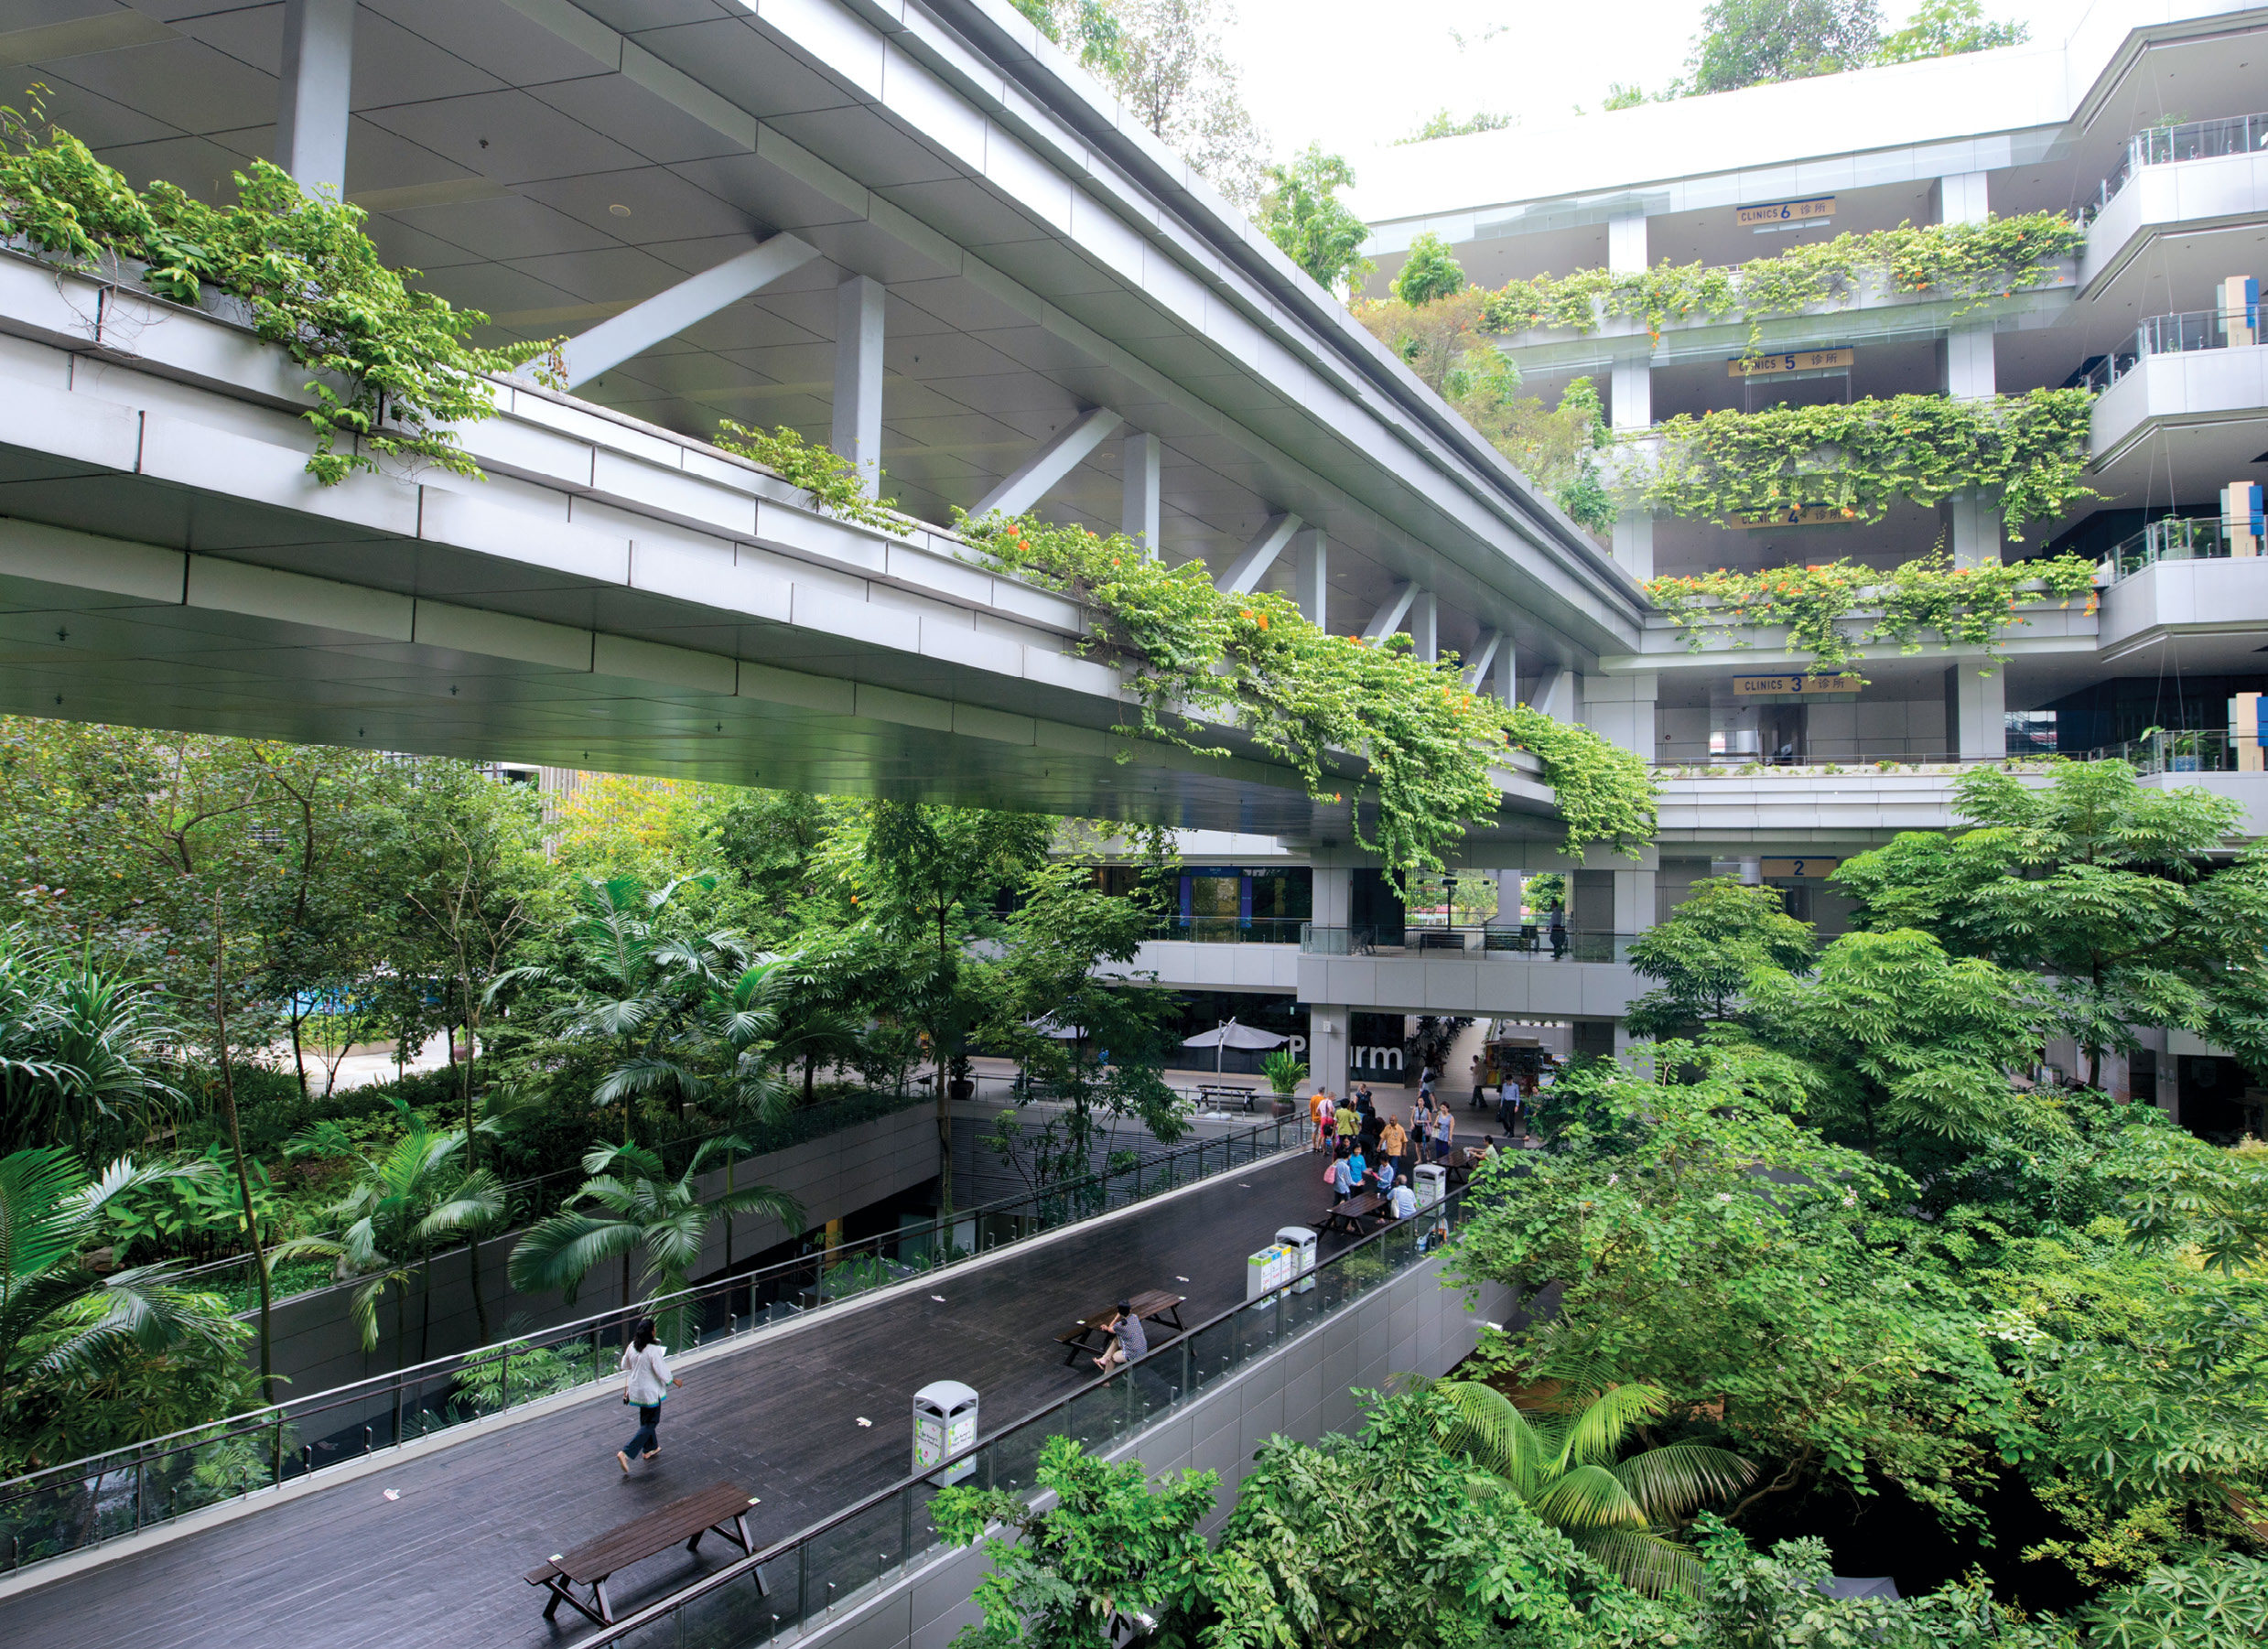 Biophilic Design is King at This Singapore Hospital - gb&d